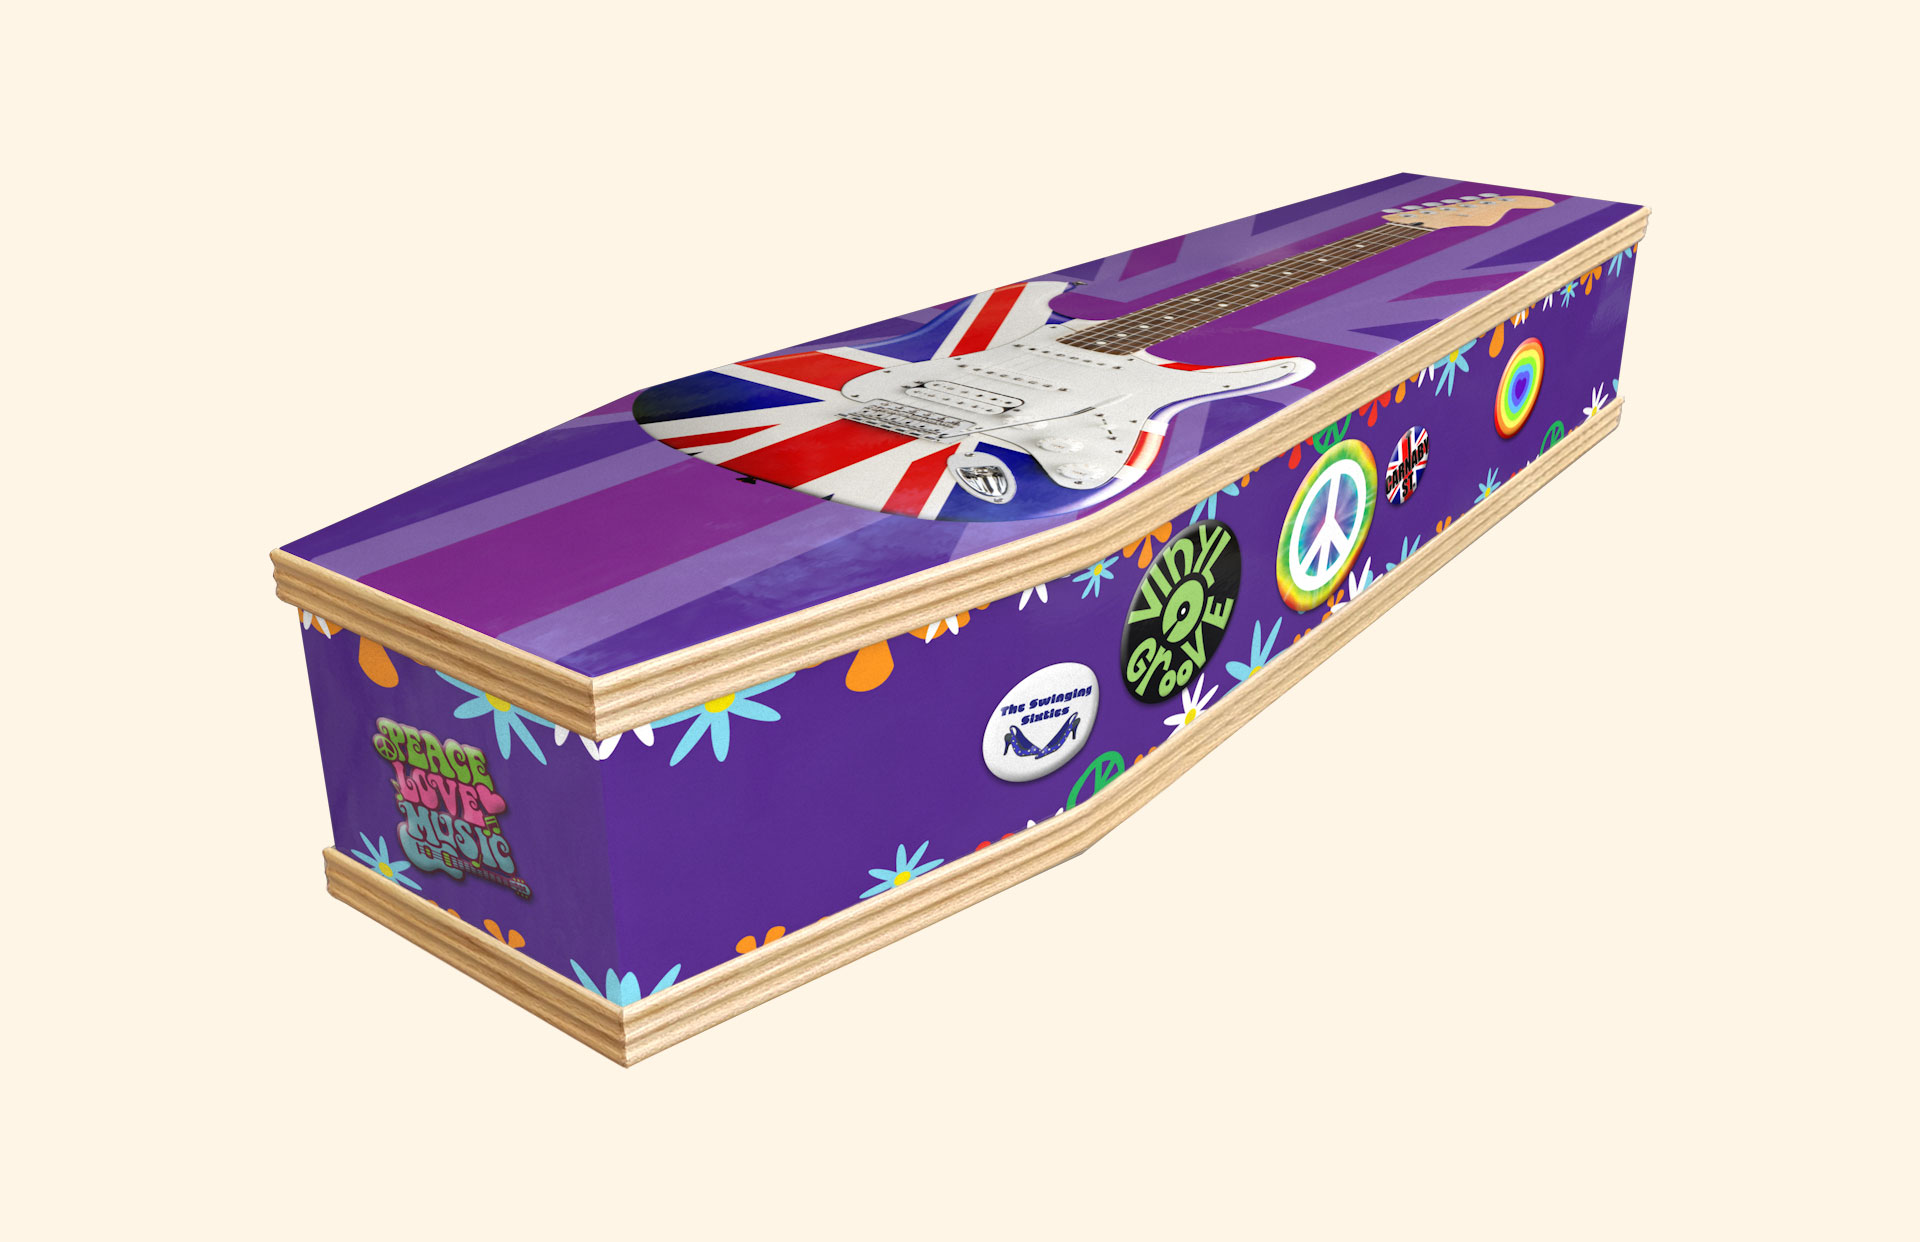 Swinging 60s design on a classic coffin